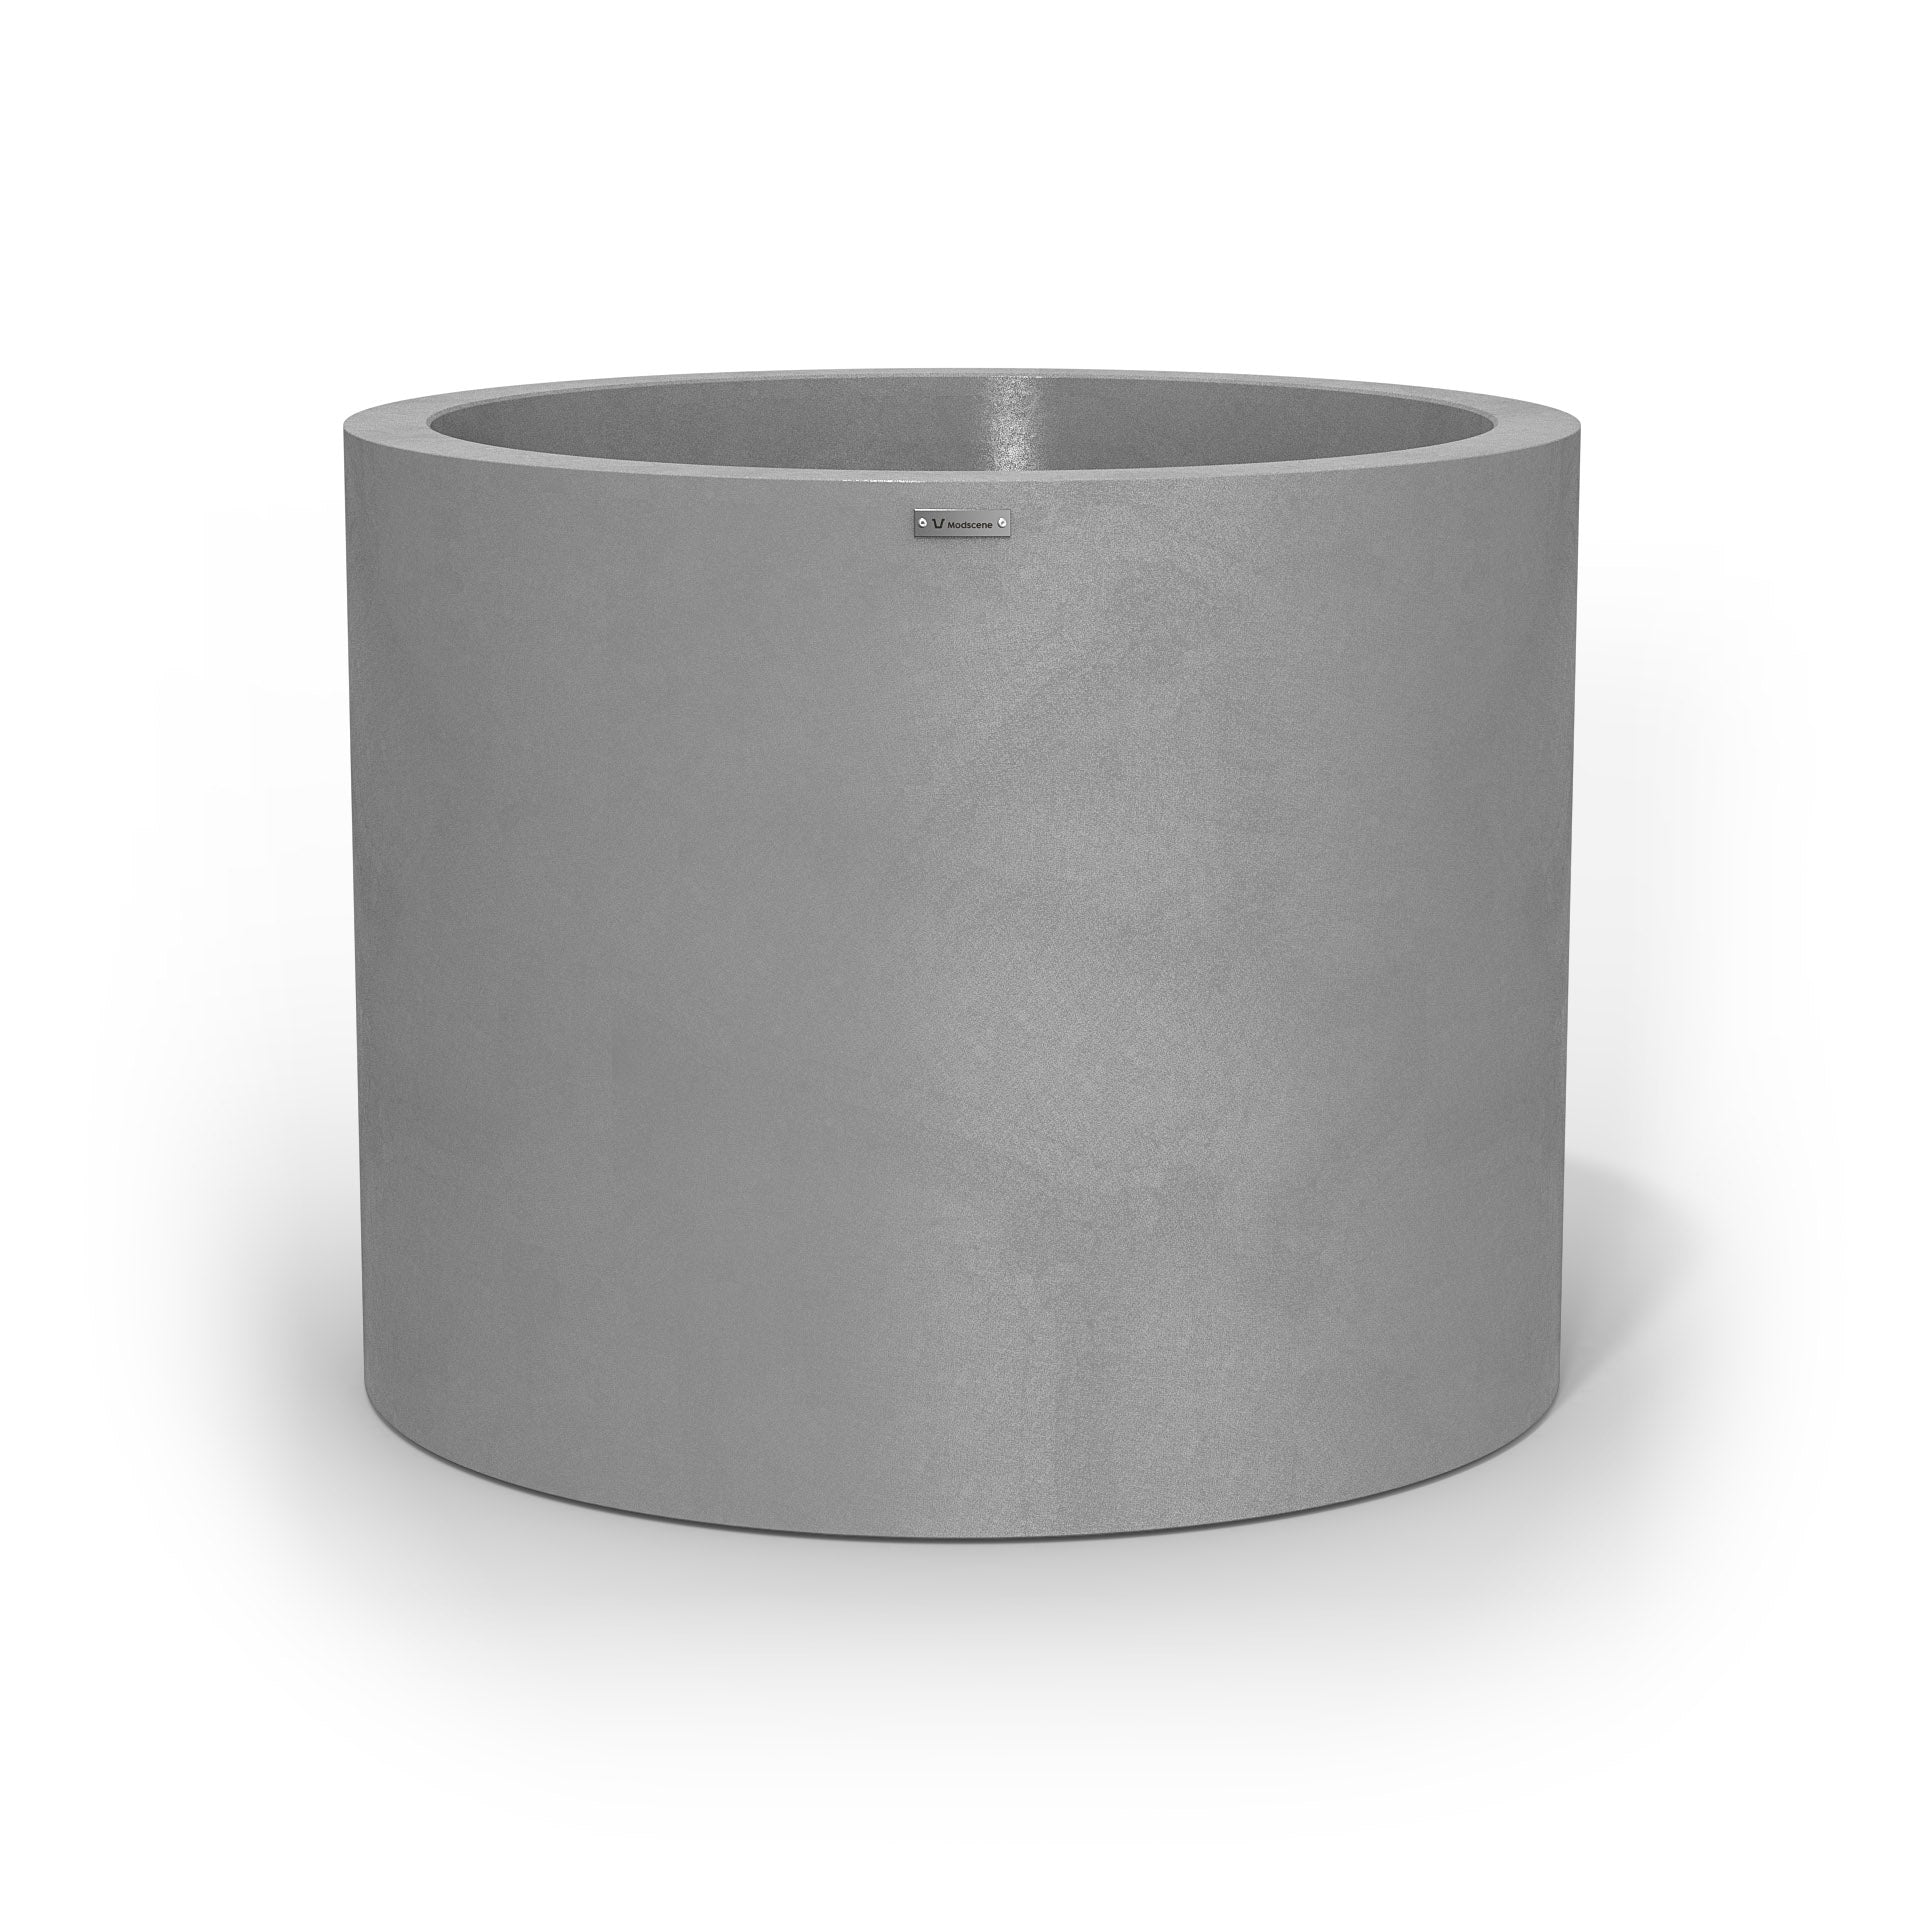 An extra large cylinder pot planter in a concrete colour. Made by Modscene NZ.